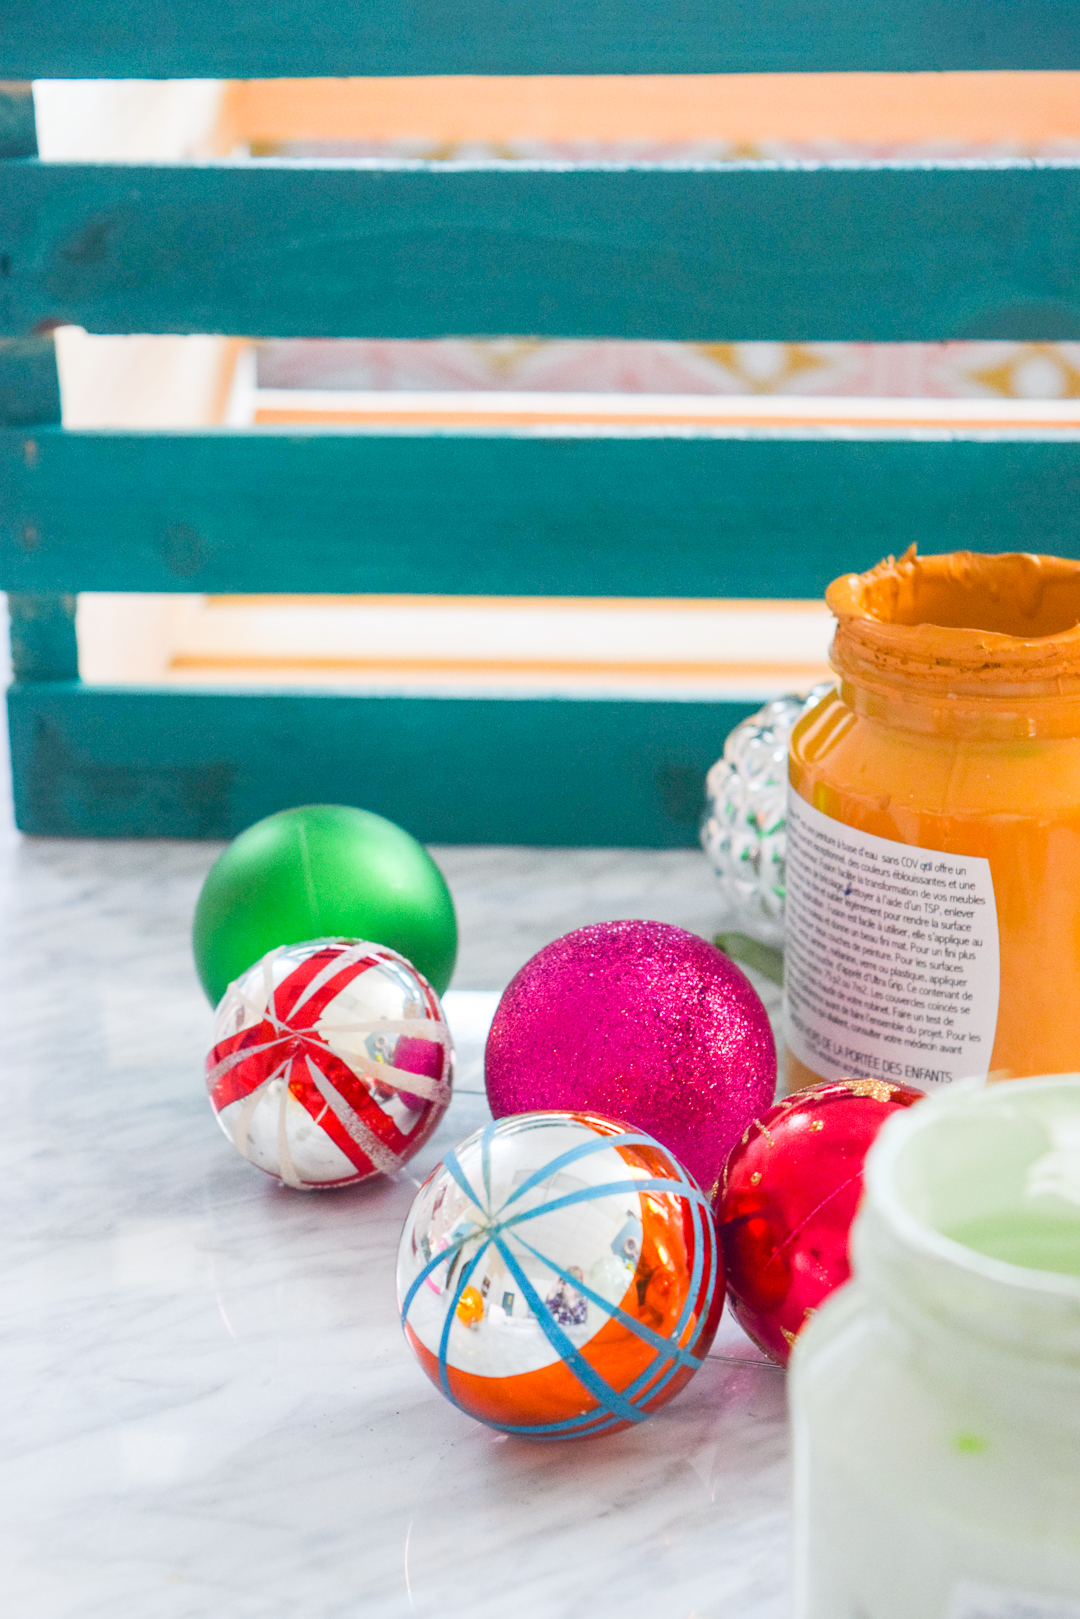 Looking for something that will keep your pieces safe? Try my DIY Colourful Ornament Storage Crate, and none of your ornaments will ever get broken again!